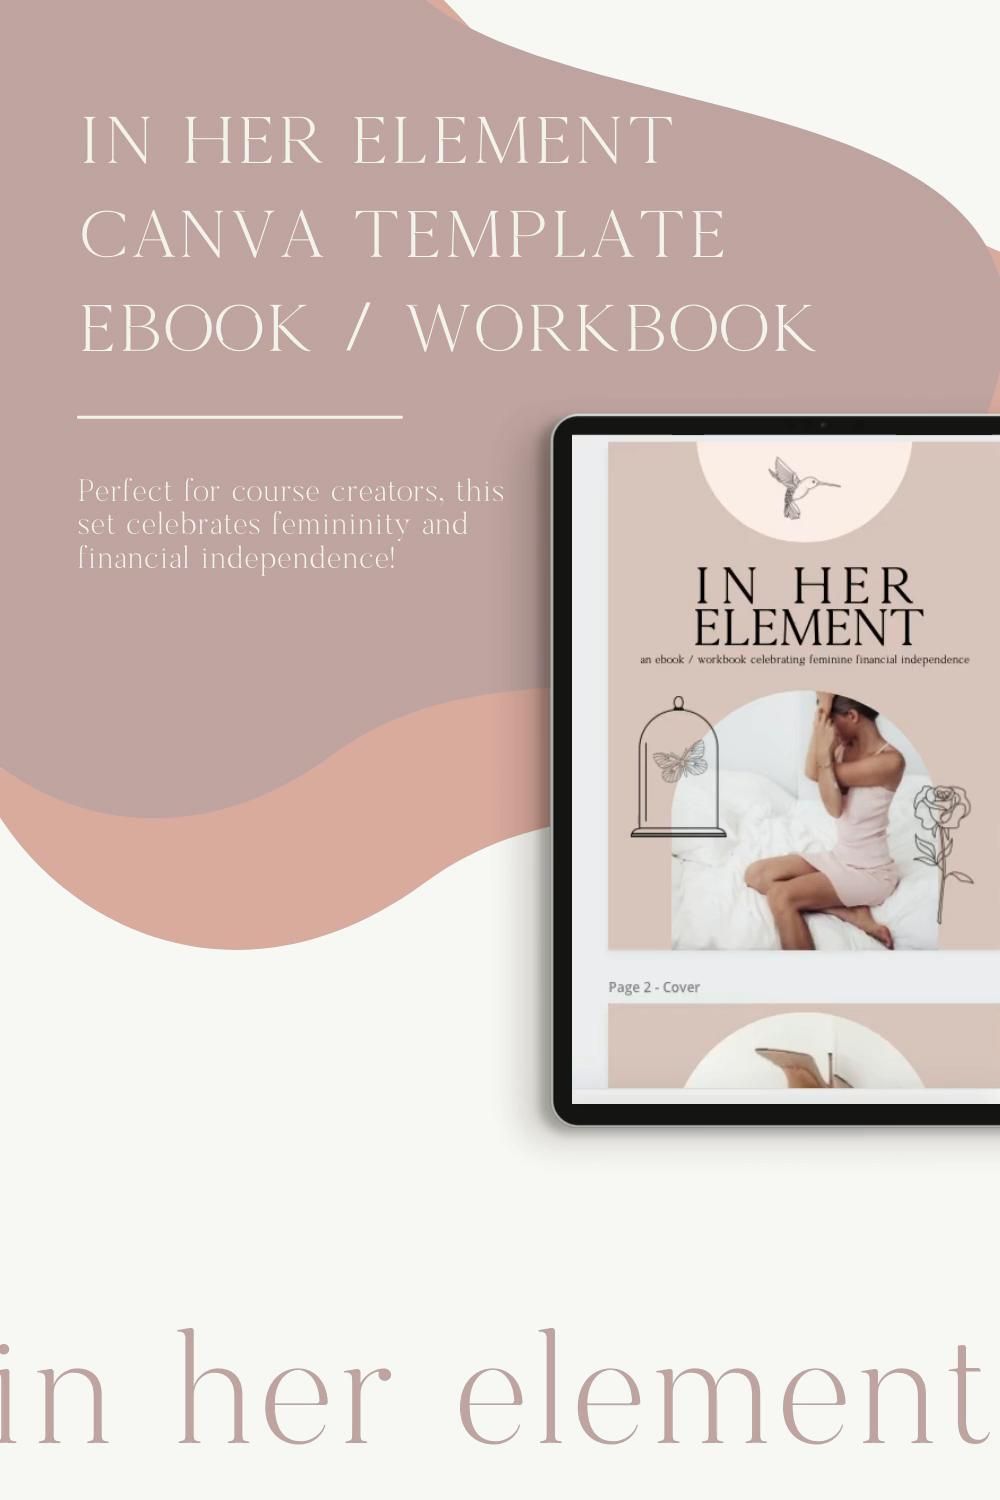 In Her Element Canva Template for Bloggers, Writers, Coaches - In Her Element Canva Template for Bloggers, Writers, Coaches -   style Guides book